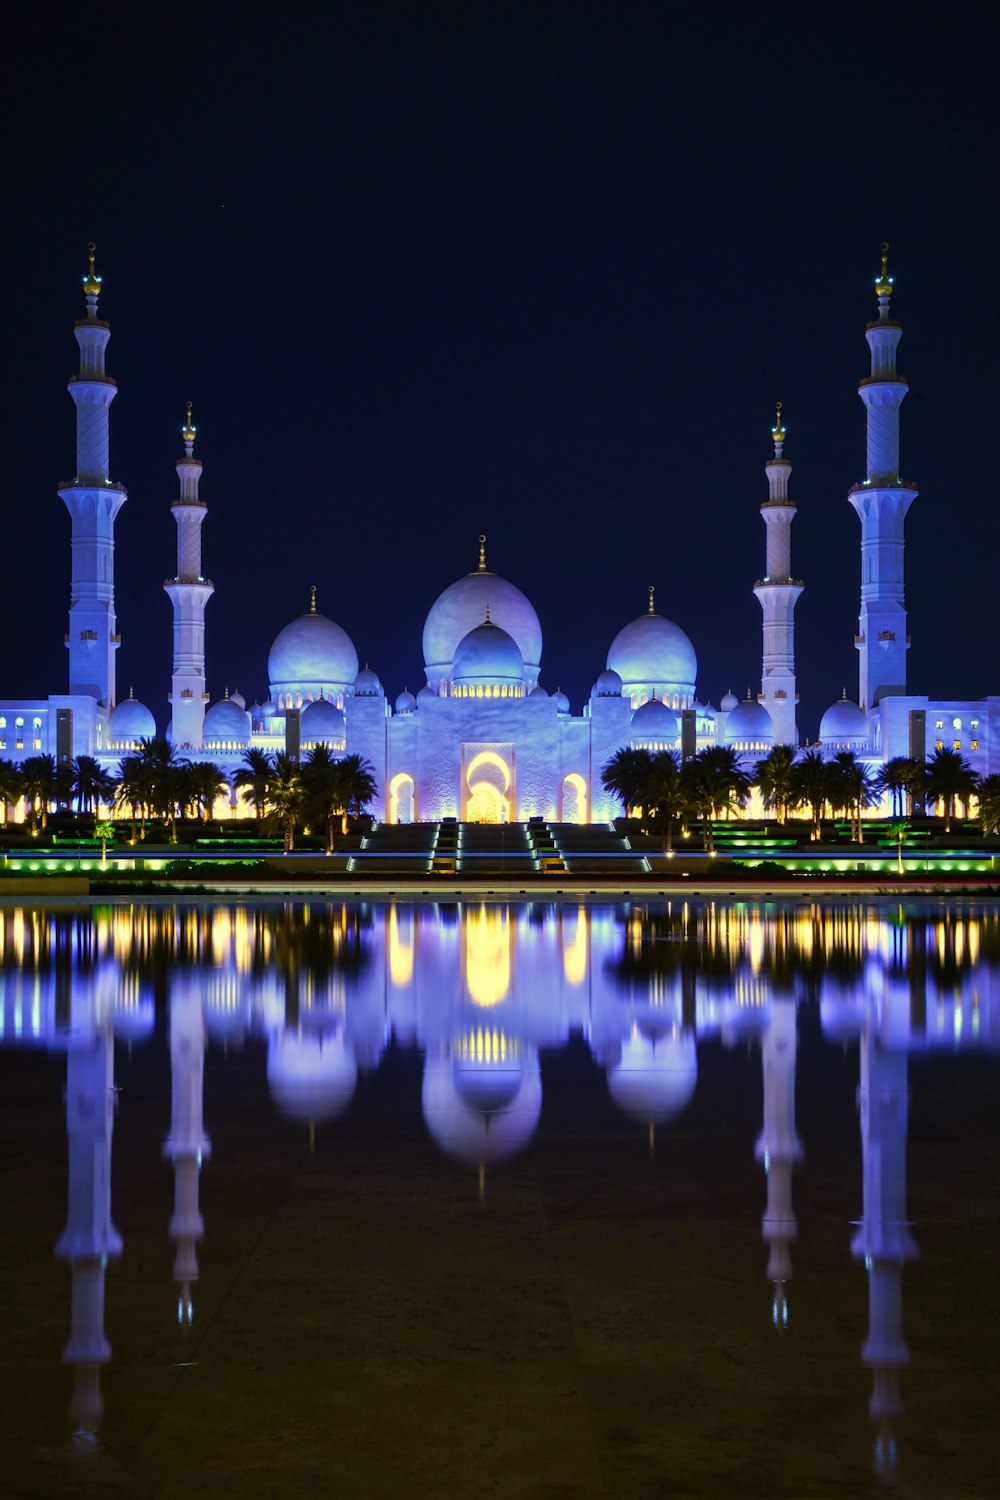 a building with towers and domes at night